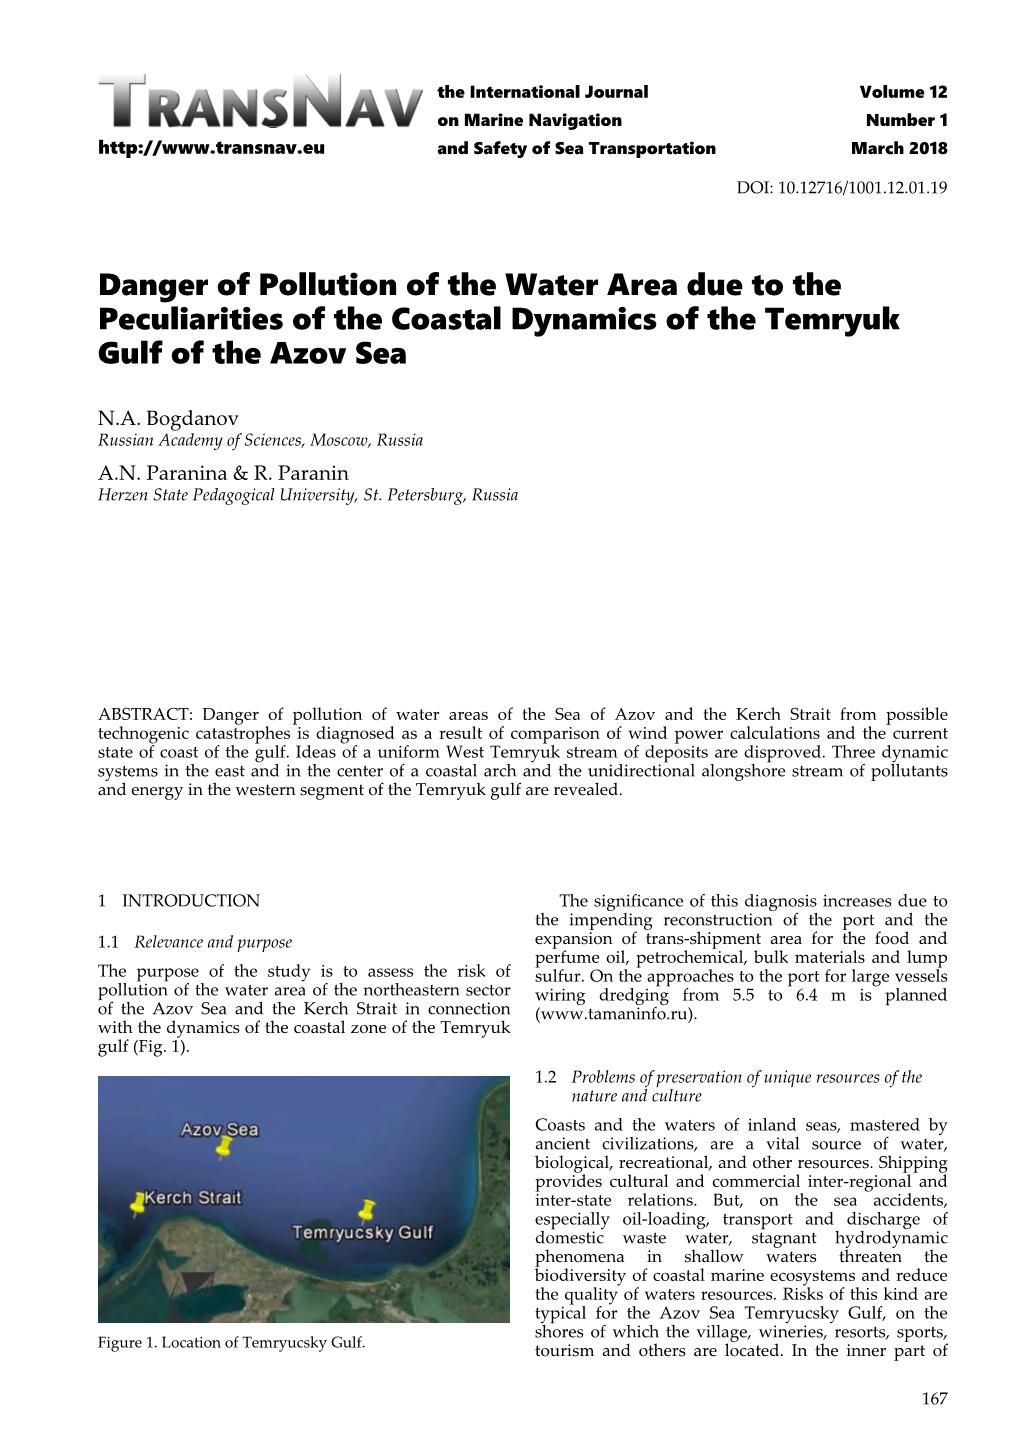 Danger of Pollution of the Water Area Due to the Peculiarities of the Coastal Dynamics of the Temryuk Gulf of the Azov Sea